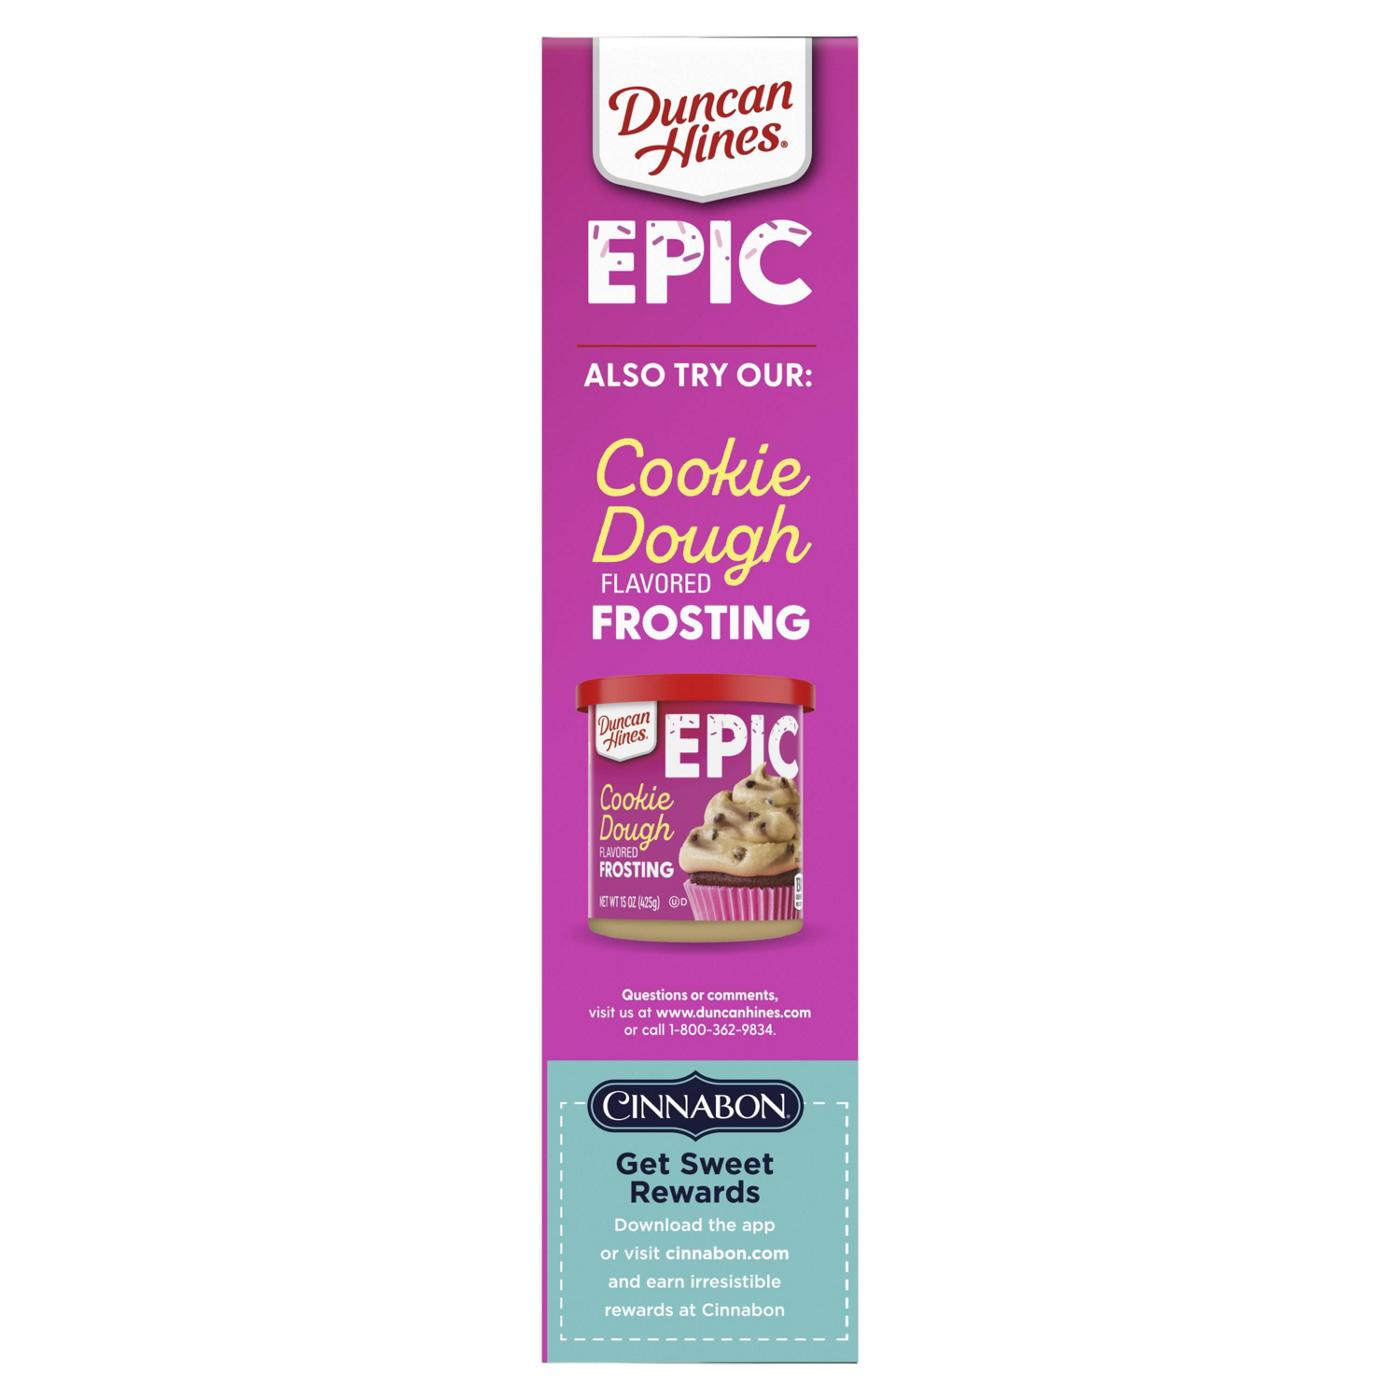 Duncan Hines Epic Cinnabon Bakery Inspired Muffin Kit; image 5 of 5